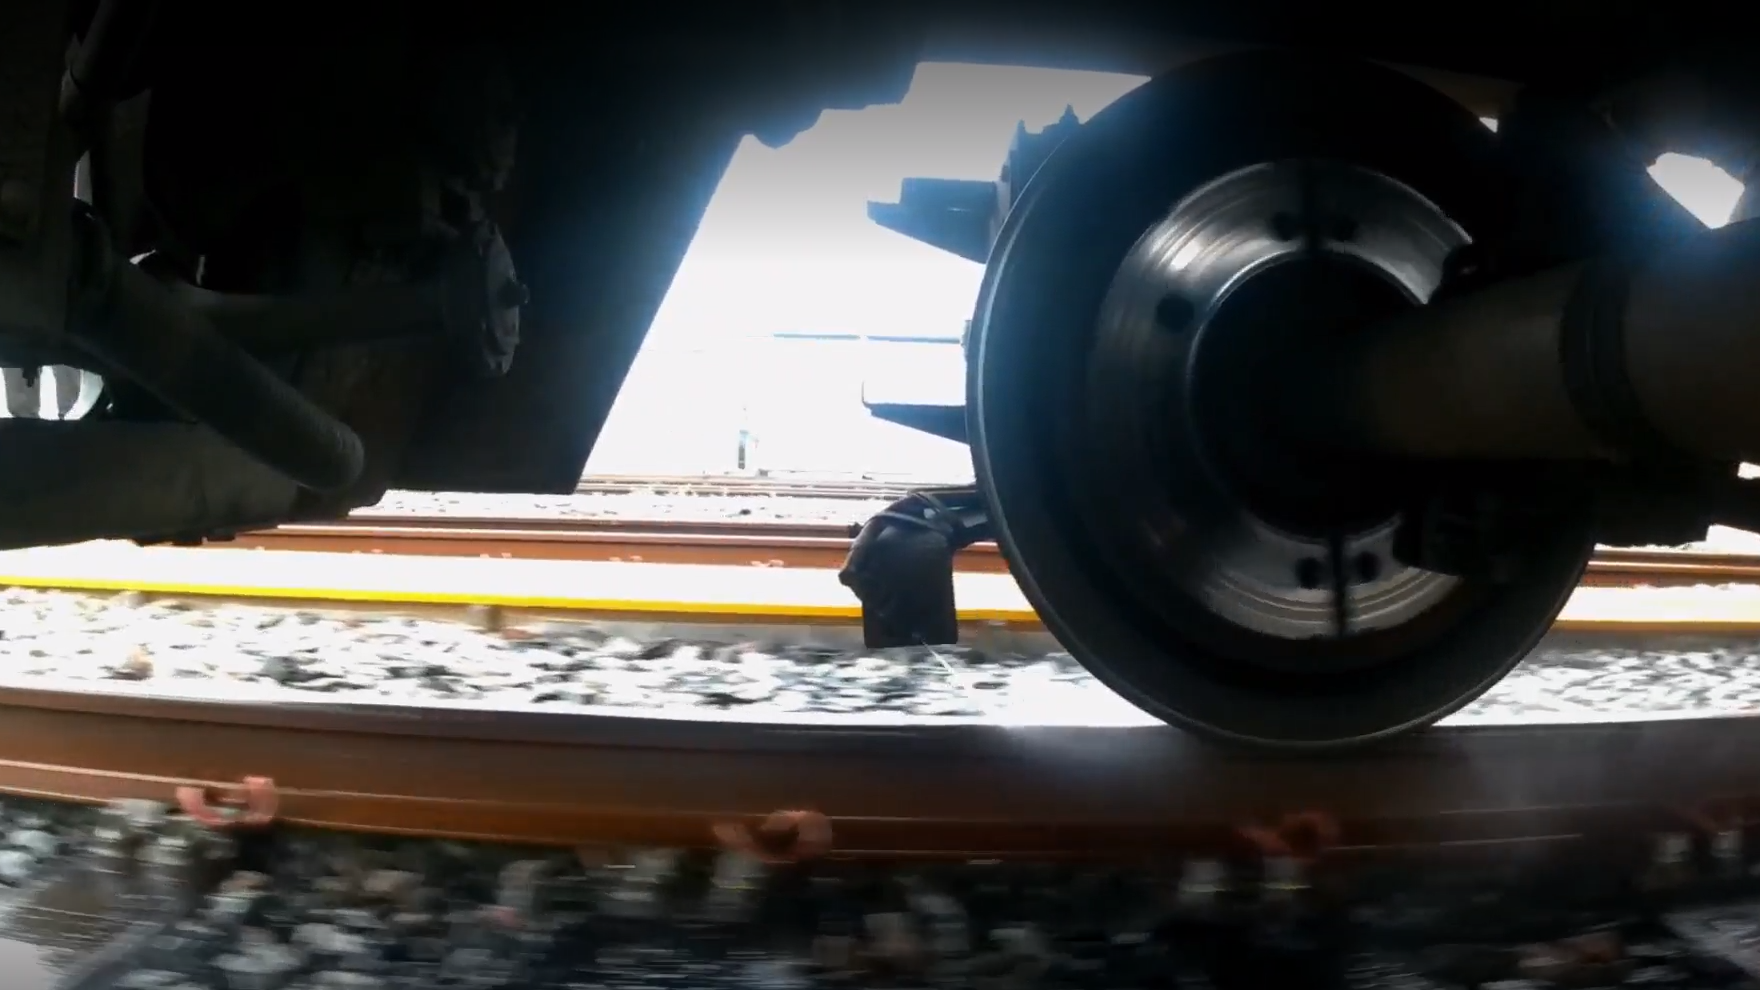 This image shows Water-Trak technology on the underside of a Northern train